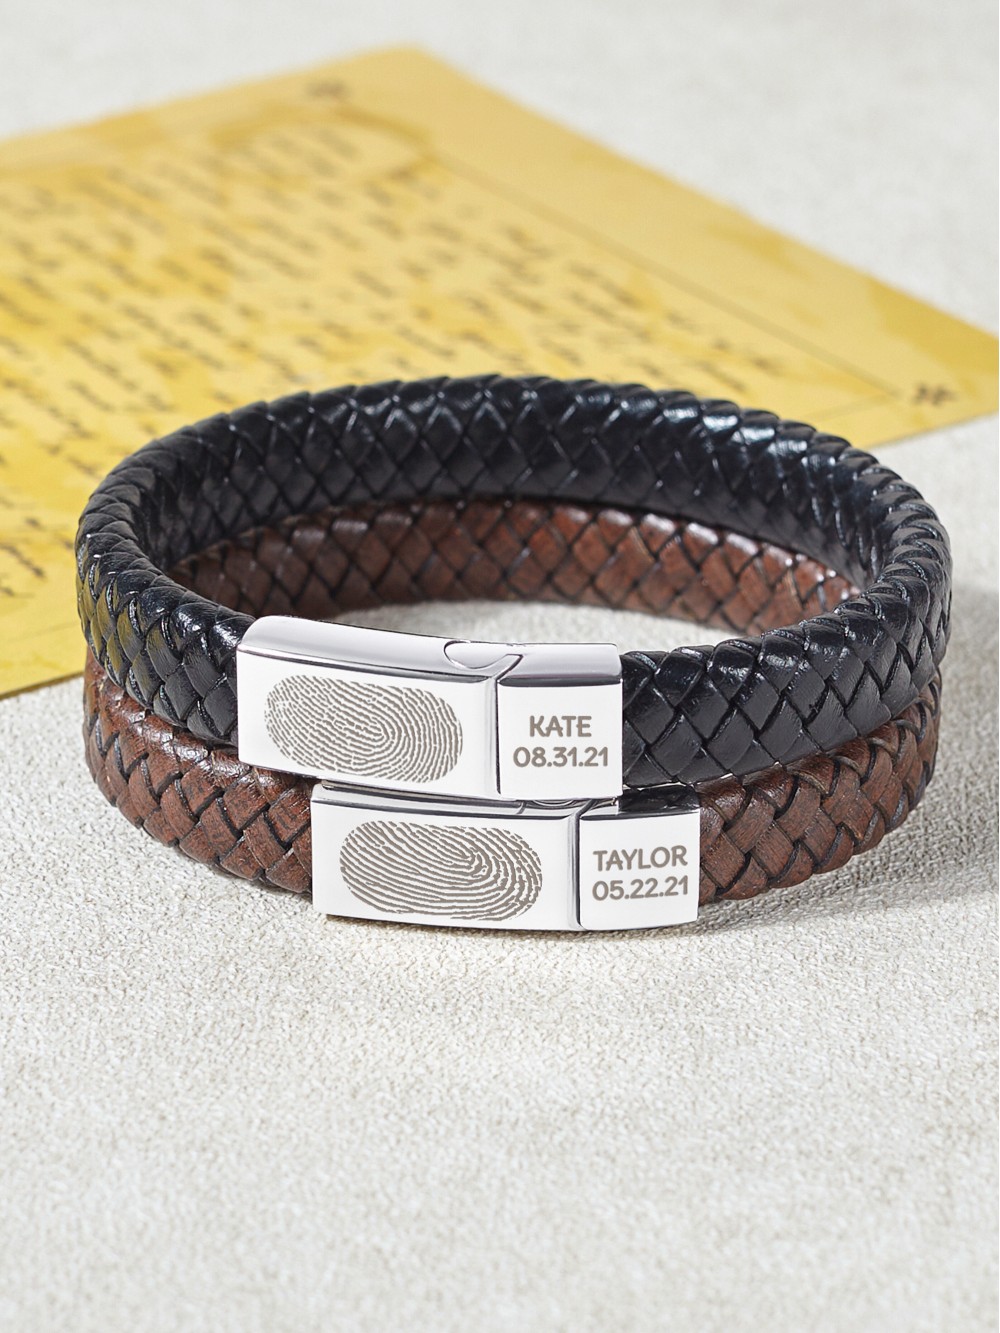 Buy Myjewel Your Customized Text | Laser Engraved Men's Leather ID Bracelet  in Rope Stainless Steel, Silver, and Black - Stylish and Meaningful Gift  for Men| Personalised Leather Wrist Band (One Name)